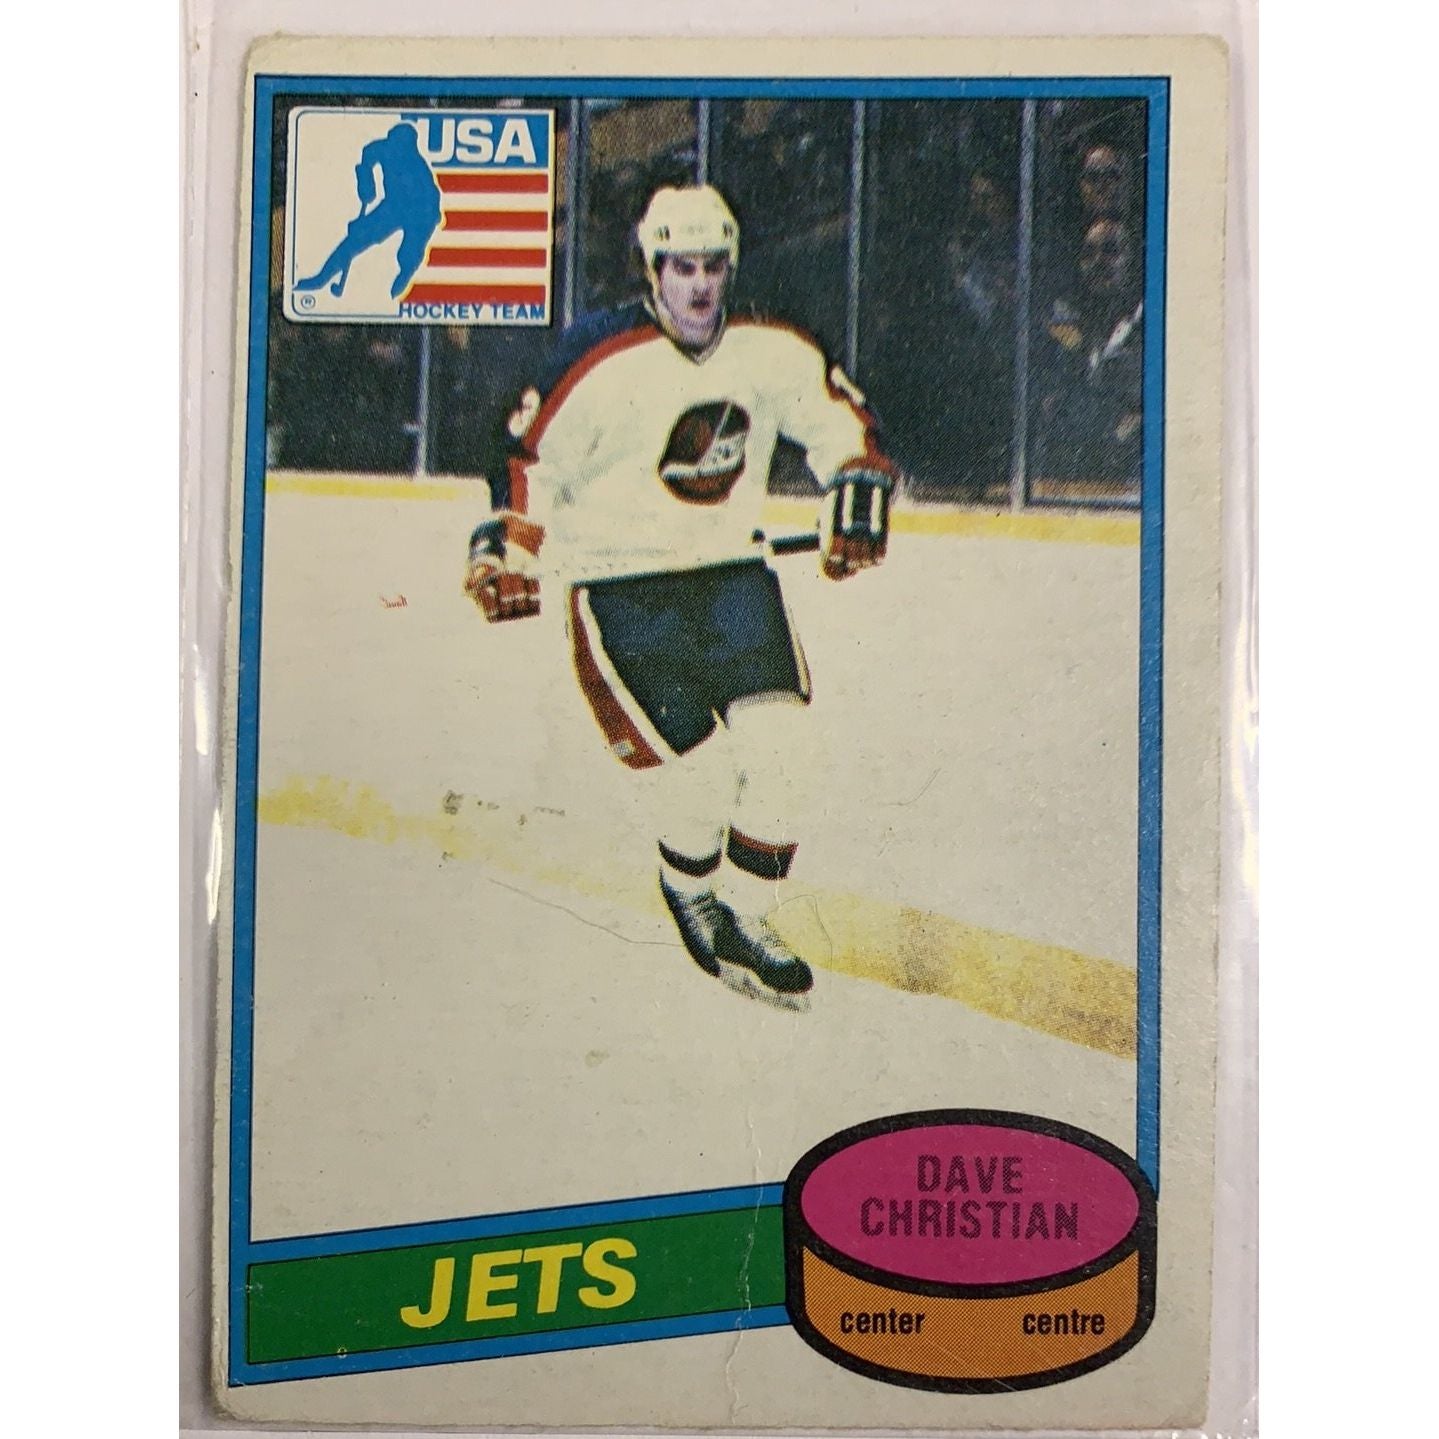  1980-81 O-Pee-Chee Dave Christian Team USA Insert  Local Legends Cards & Collectibles